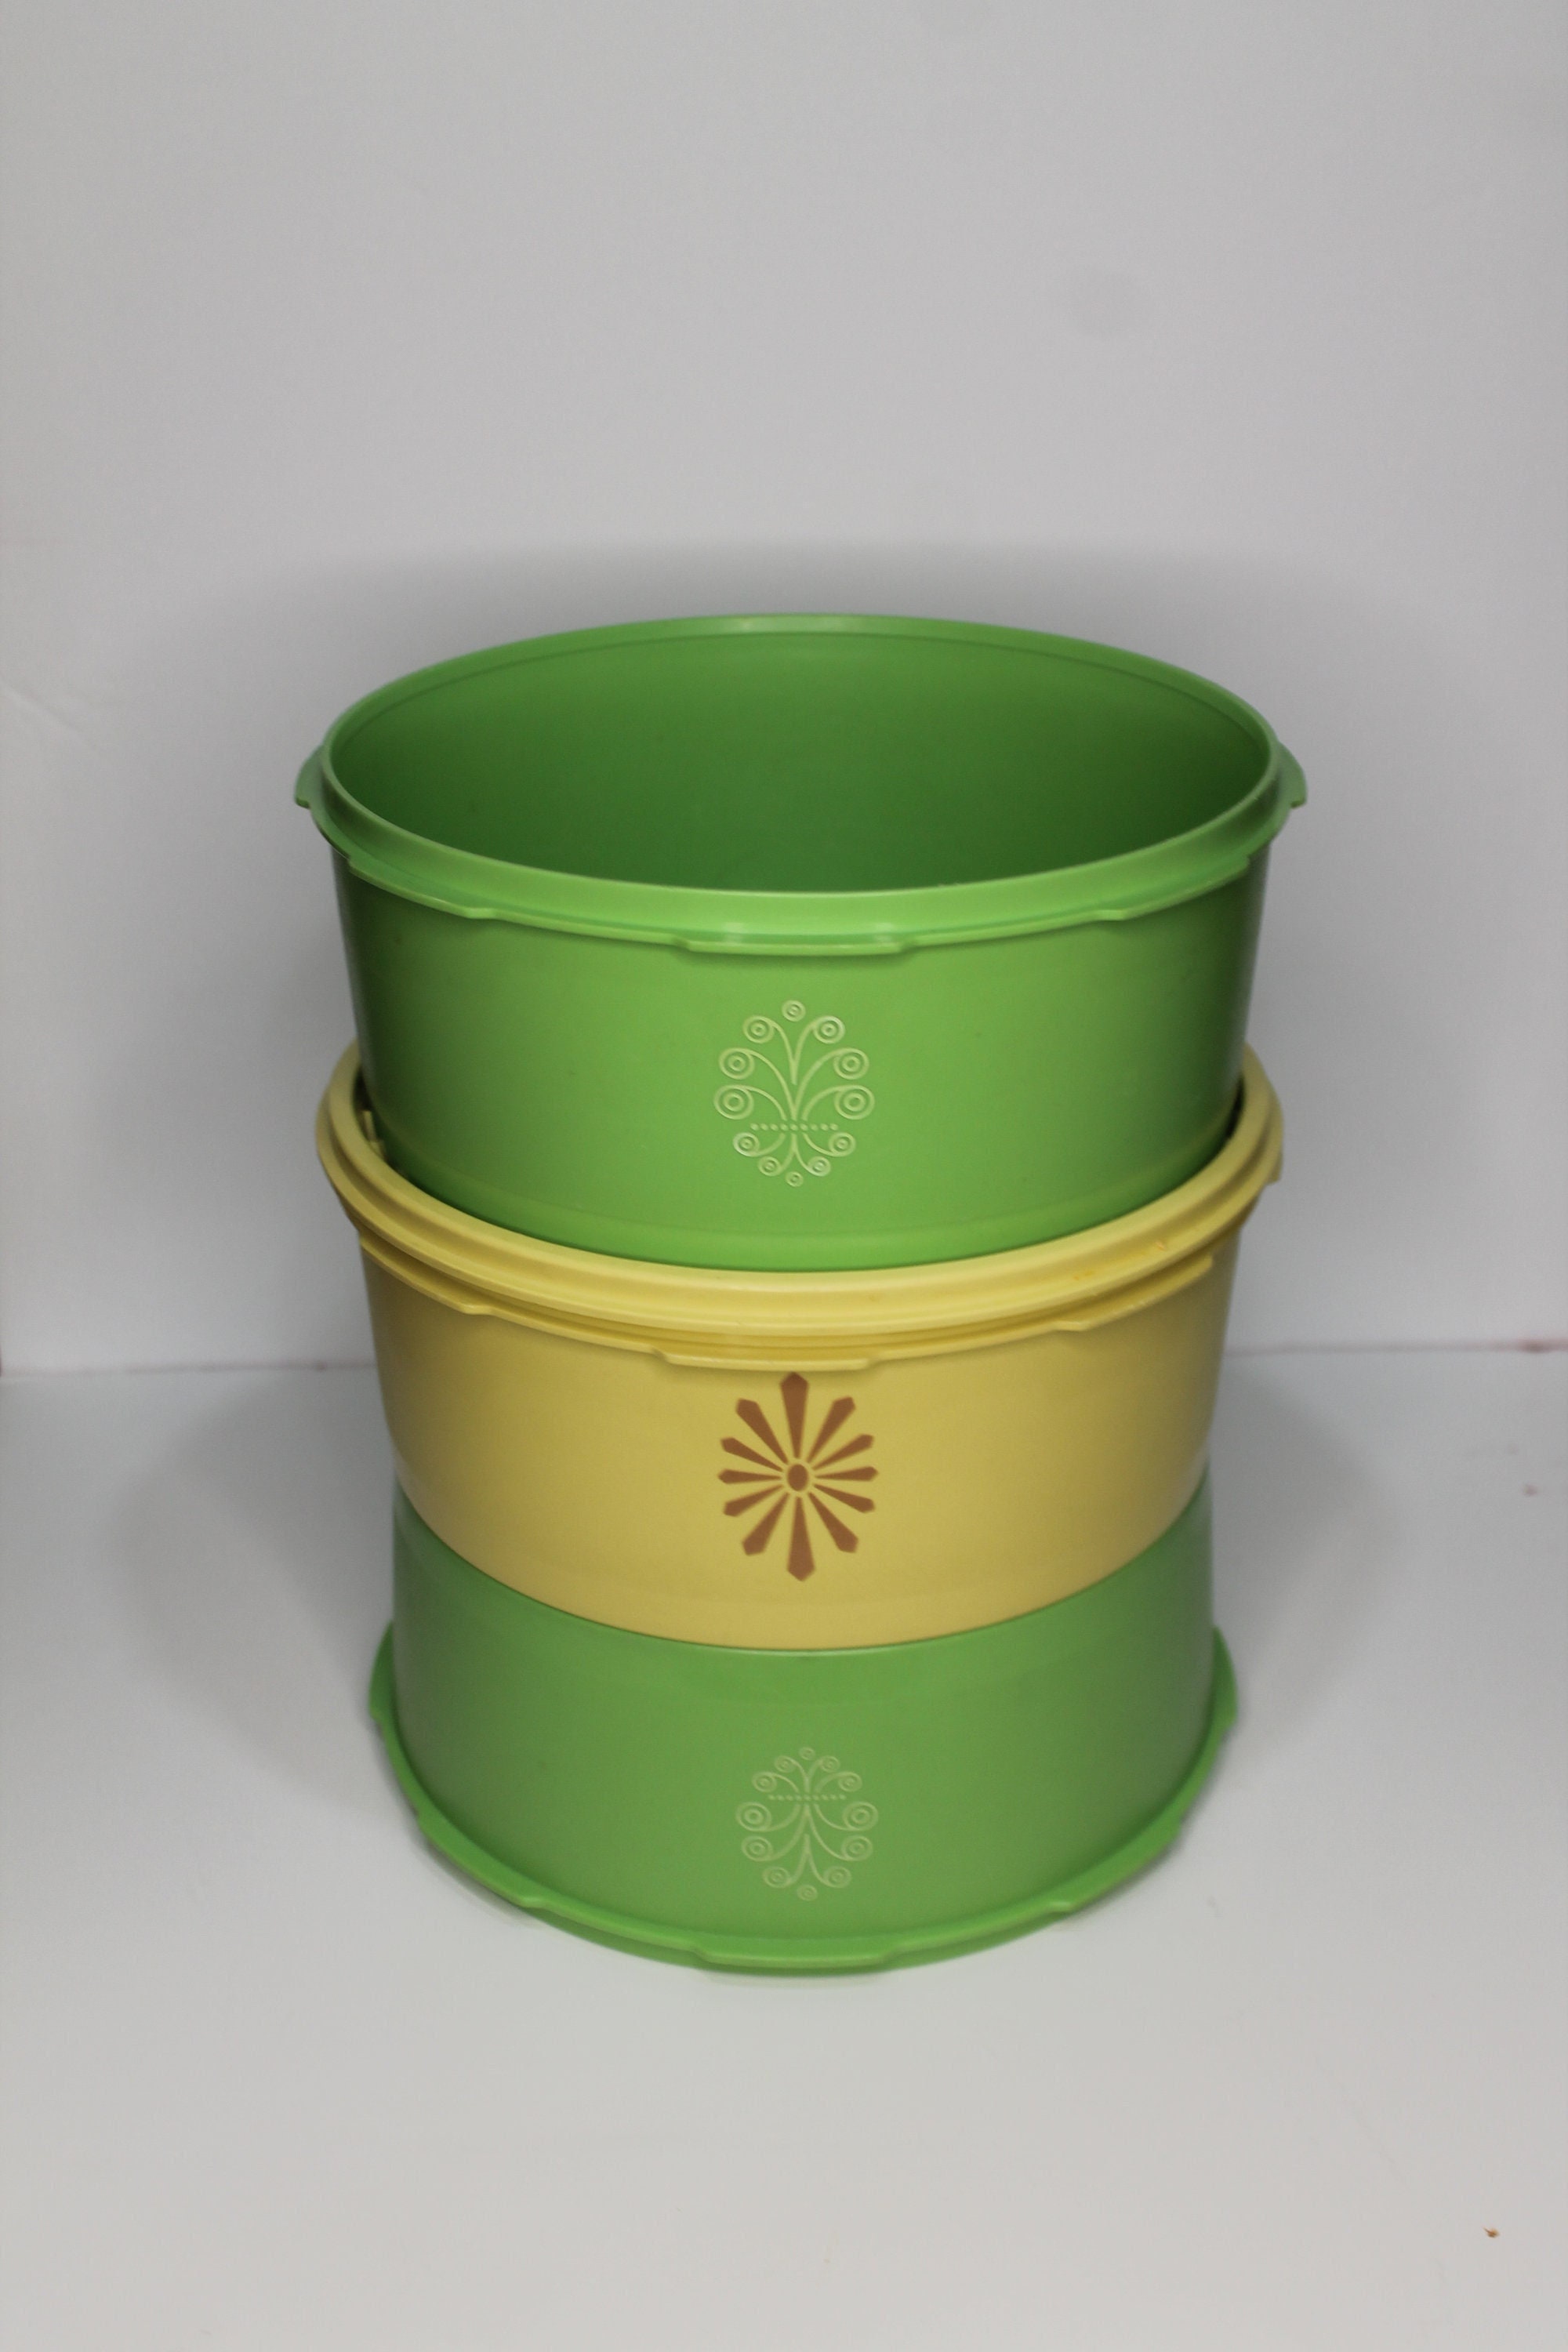 Vintage Tupperware Canister Avocado Green #809 With Accordion Lid